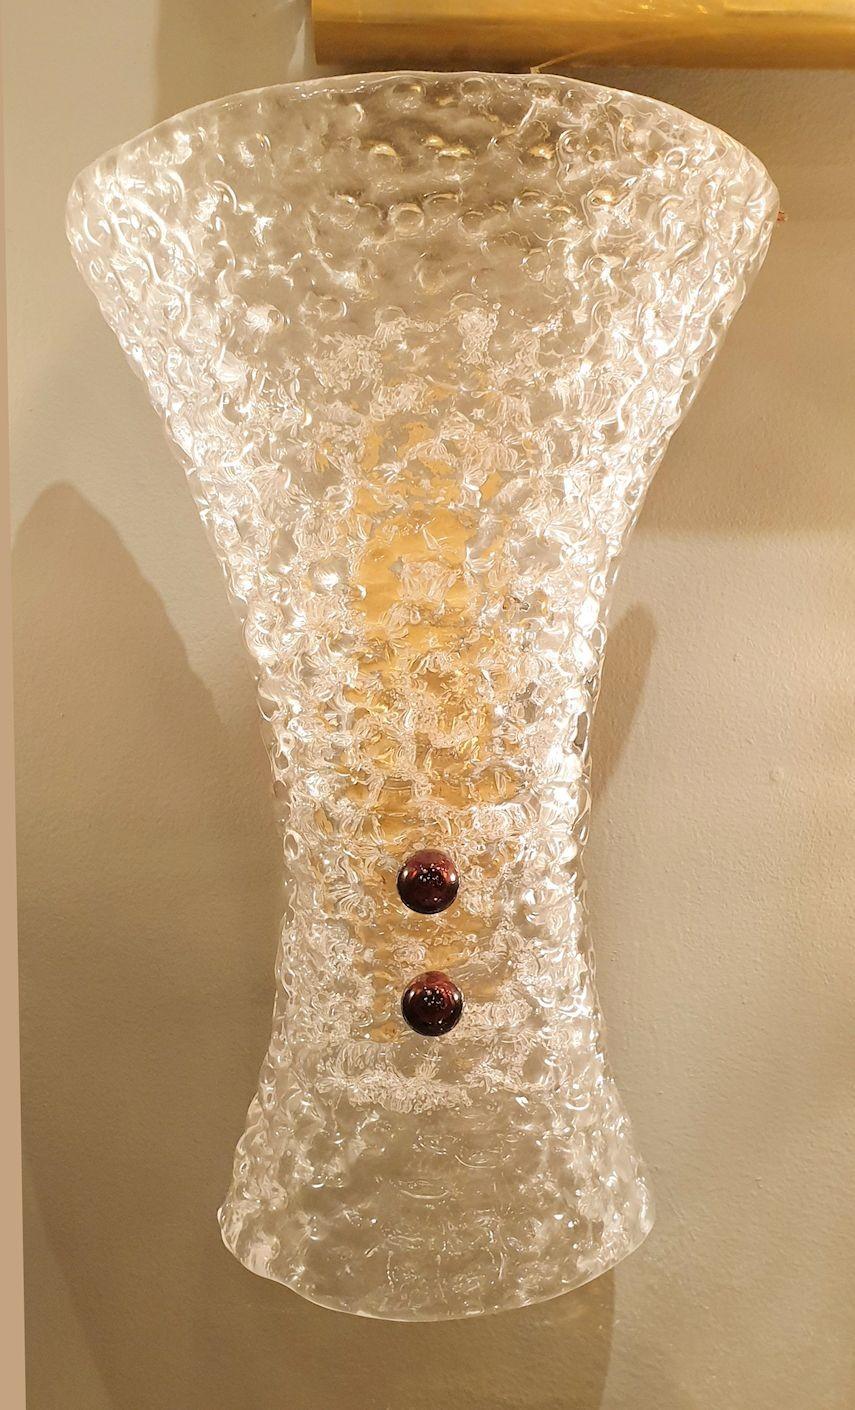 Pair of Murano glass and brass Mid Century Modern wall sconces.
Beautiful quality, in the style of Barovier & Toso. Italy 1970s.
Made of textured translucent clear Murano glass, with 2 purple glass screws each, and brass mounts.
The vintage Murano